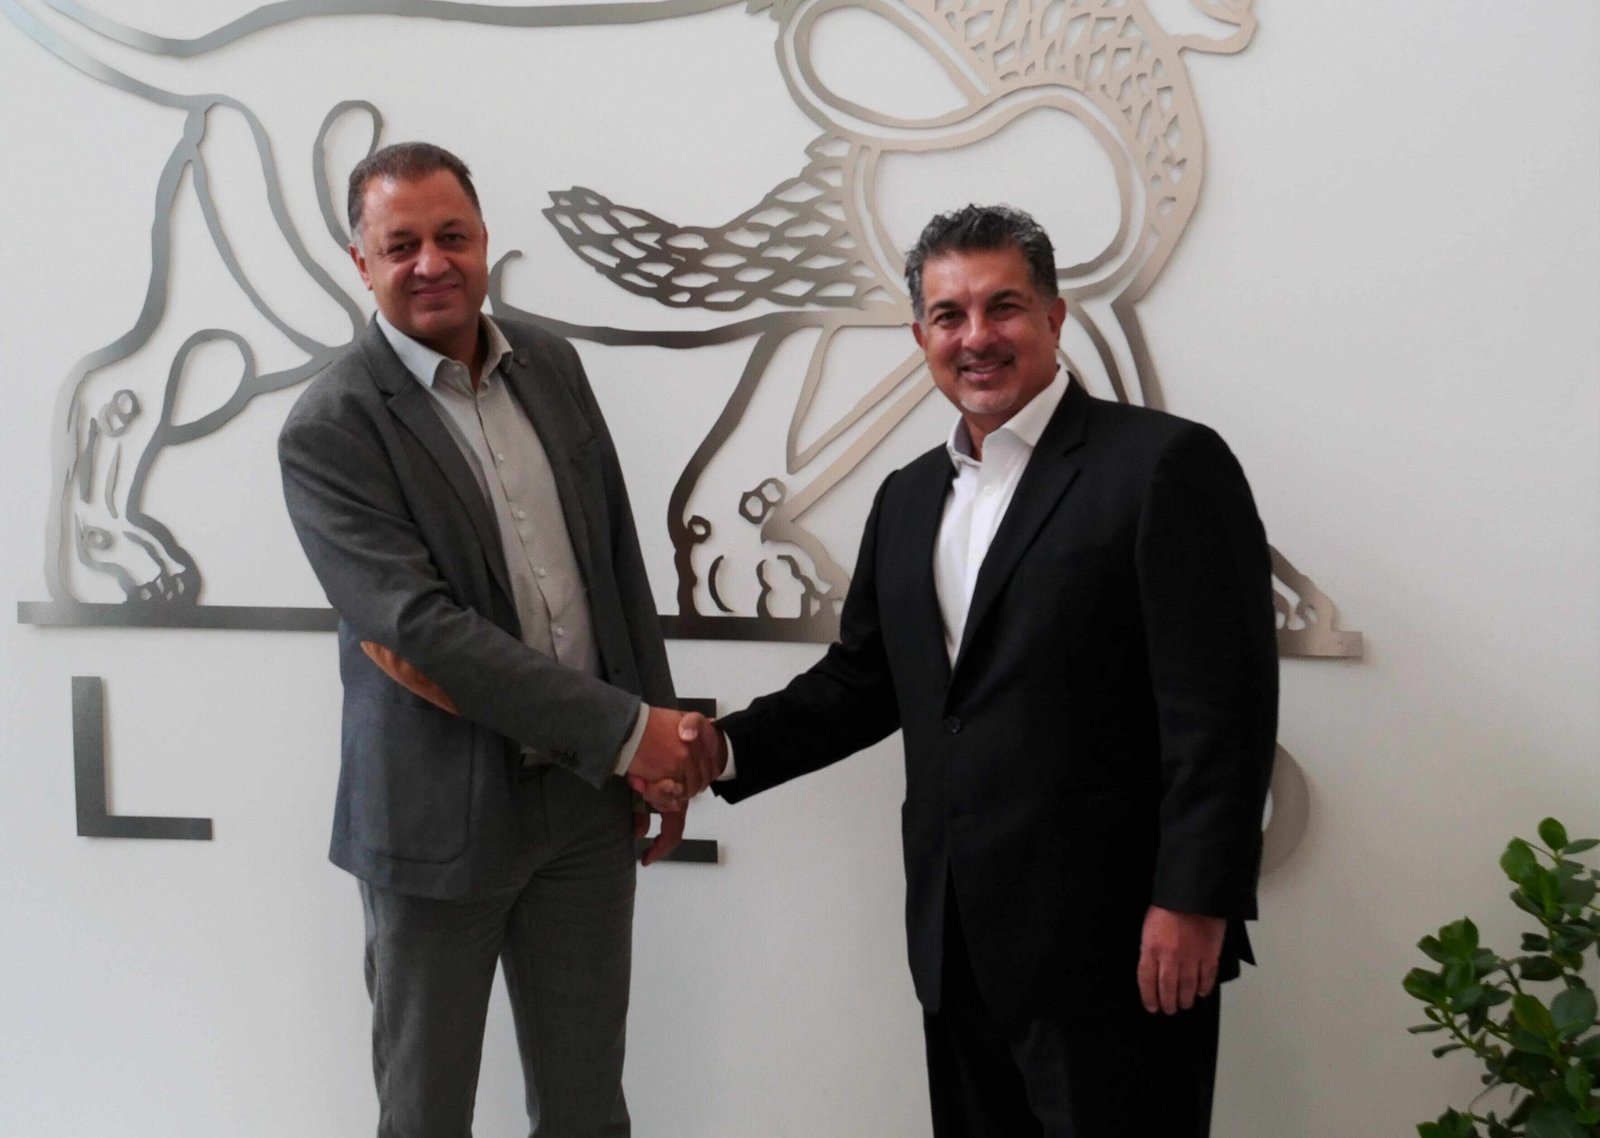 Khalid Aouidat, Vice President, Commercial Activities, SEA, LEO Pharma (left) and Bijay Singh, Head of Business Unit Healthcare at DKSH (right) at LEO Pharma's head office in Denmark.